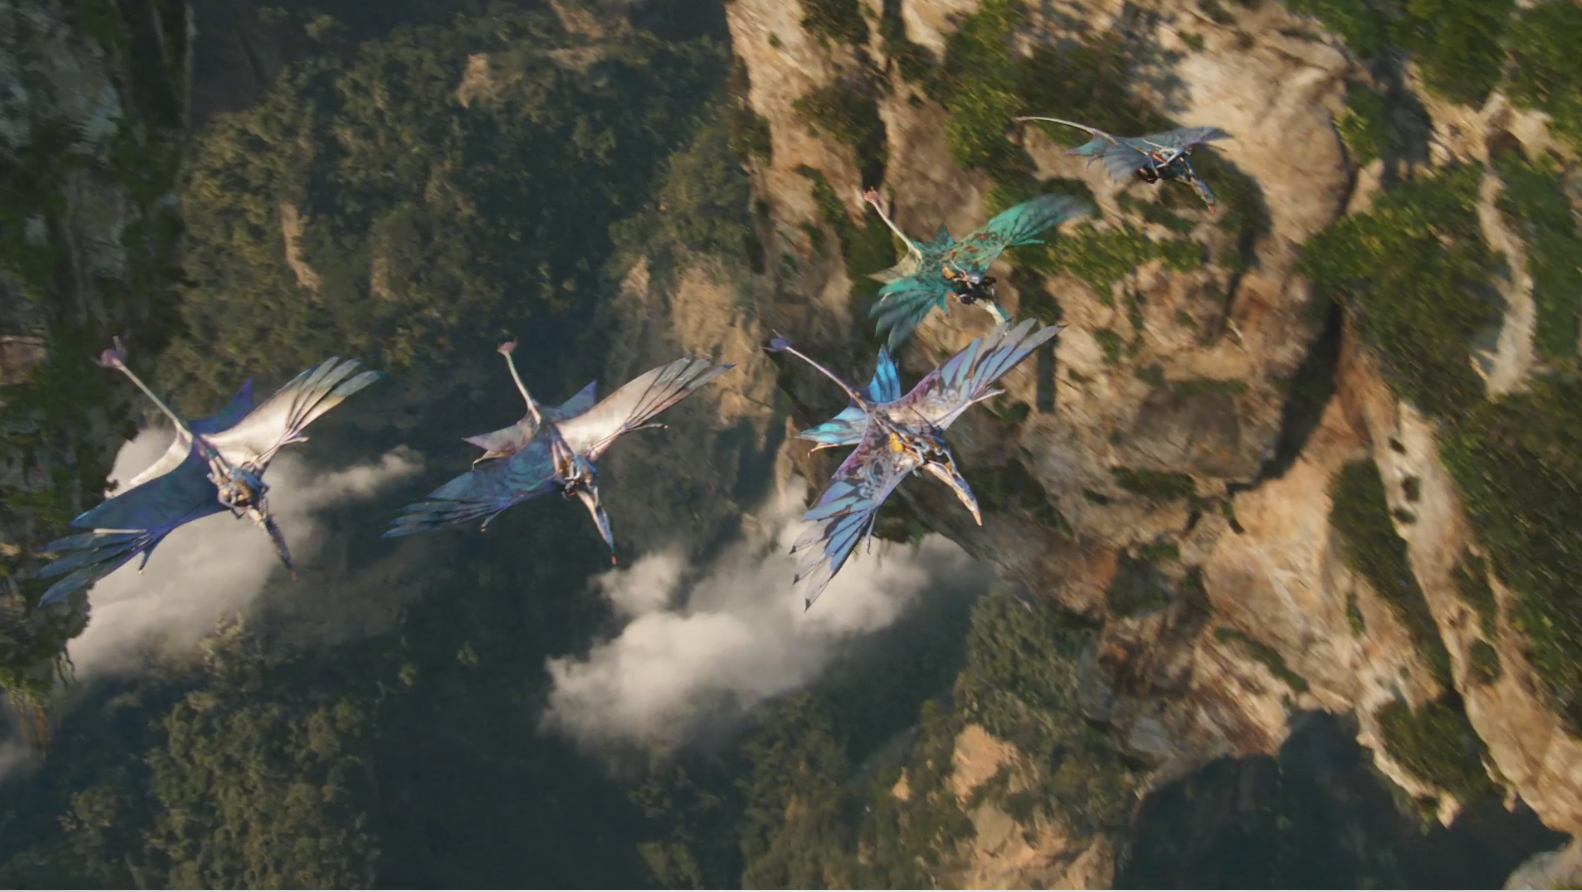 Avatar avatars flying above water from The Way of Water movie 8K wallpaper  download